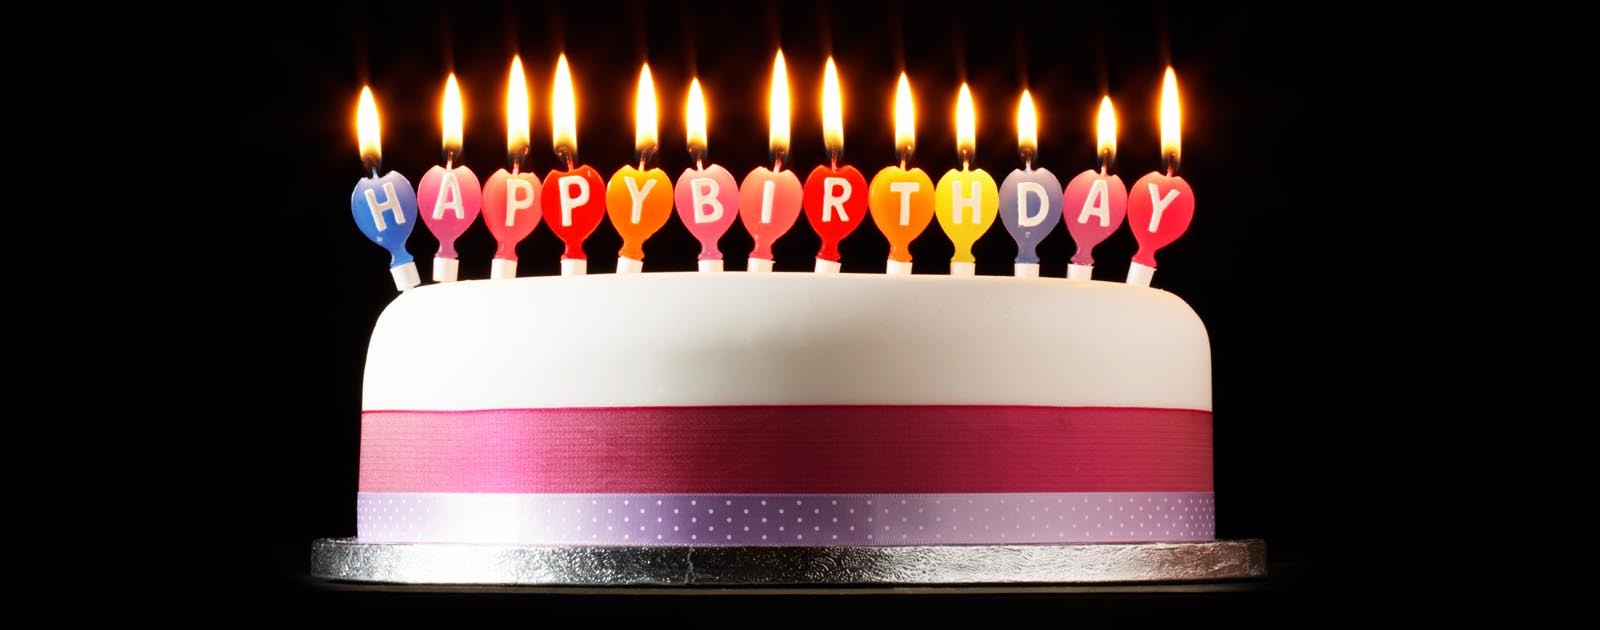 31030-00-tsk_birthday_cake_with_candles_lit_1600px_1